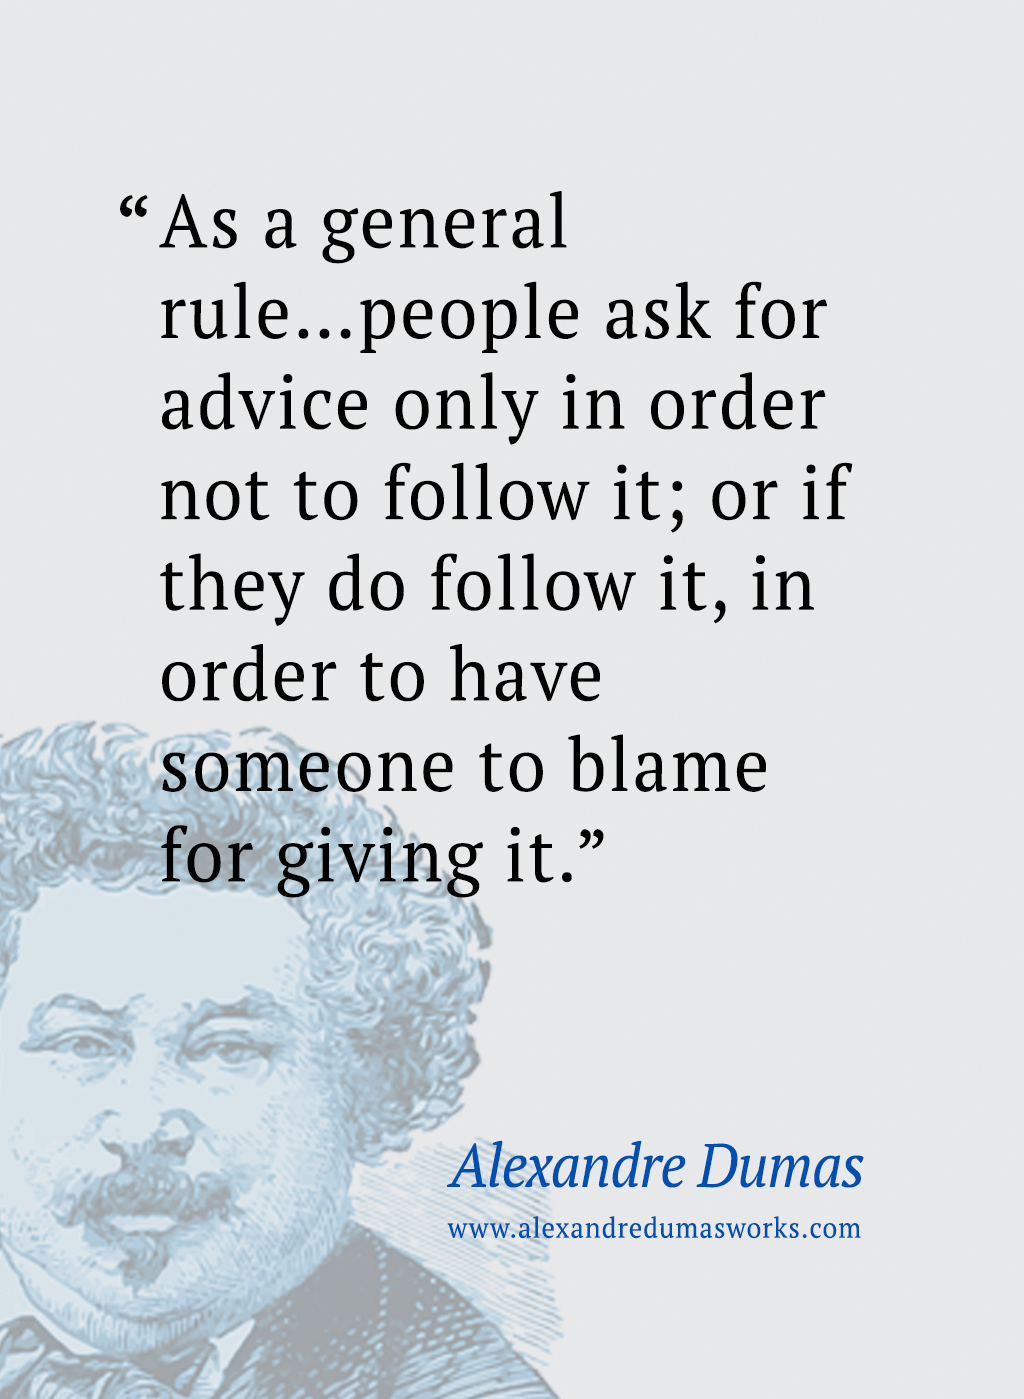 “As a general rule...people ask for advice only in order not to follow it; or if they do follow it, in order to have someone to blame for giving it.” ― Alexandre Dumas